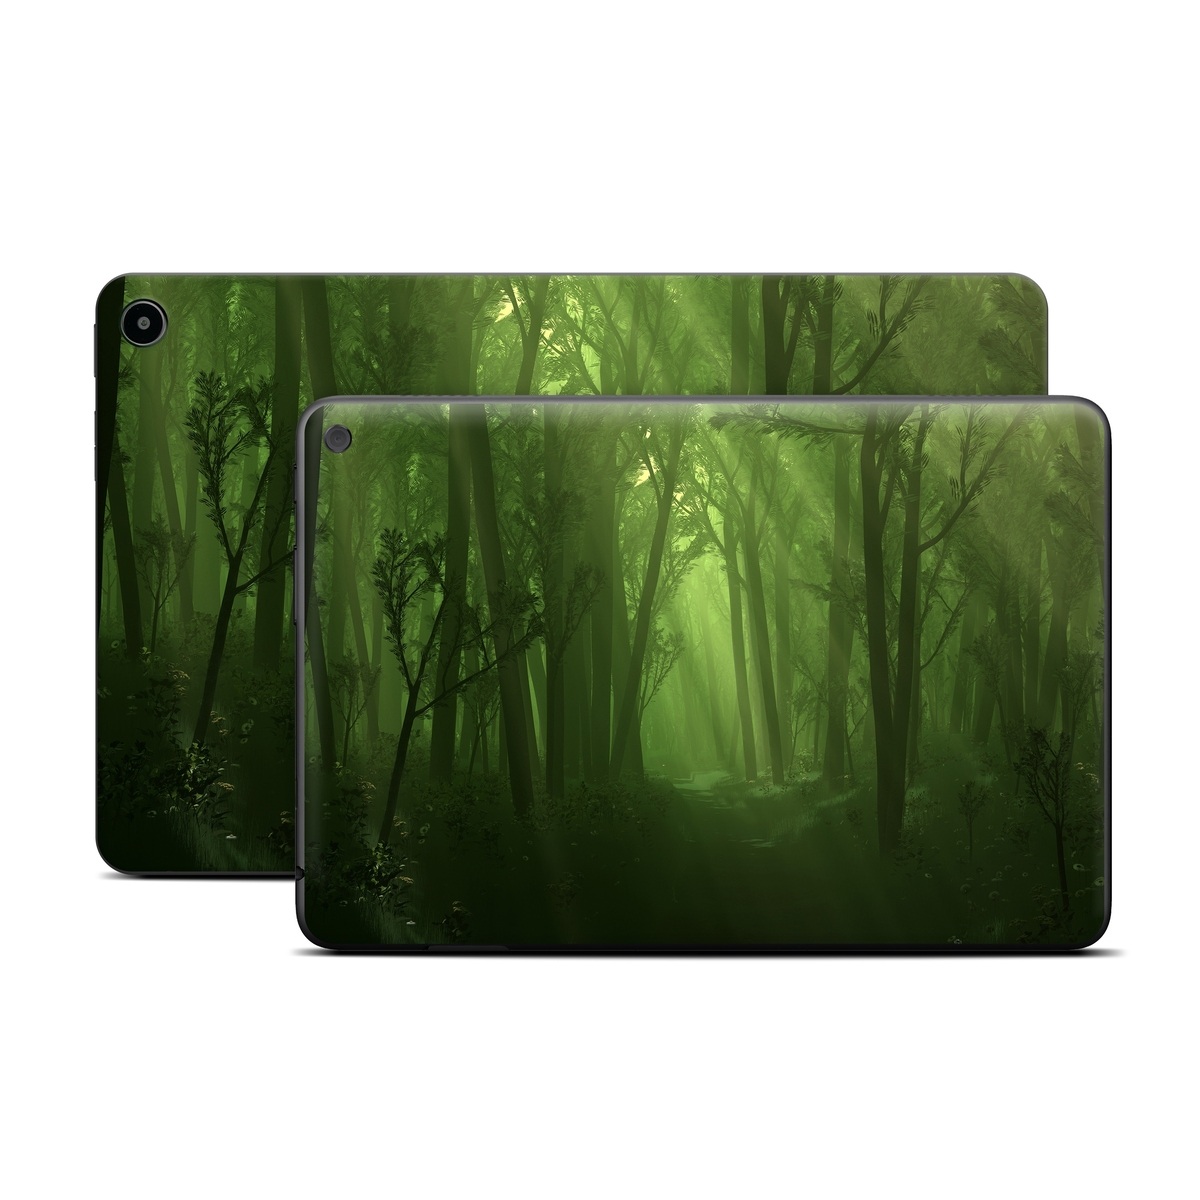 Amazon Fire Tablet Series Skin Skin design of Nature, Green, Forest, Old-growth forest, Woodland, Natural environment, Vegetation, Tree, Natural landscape, Atmospheric phenomenon, with black, green colors